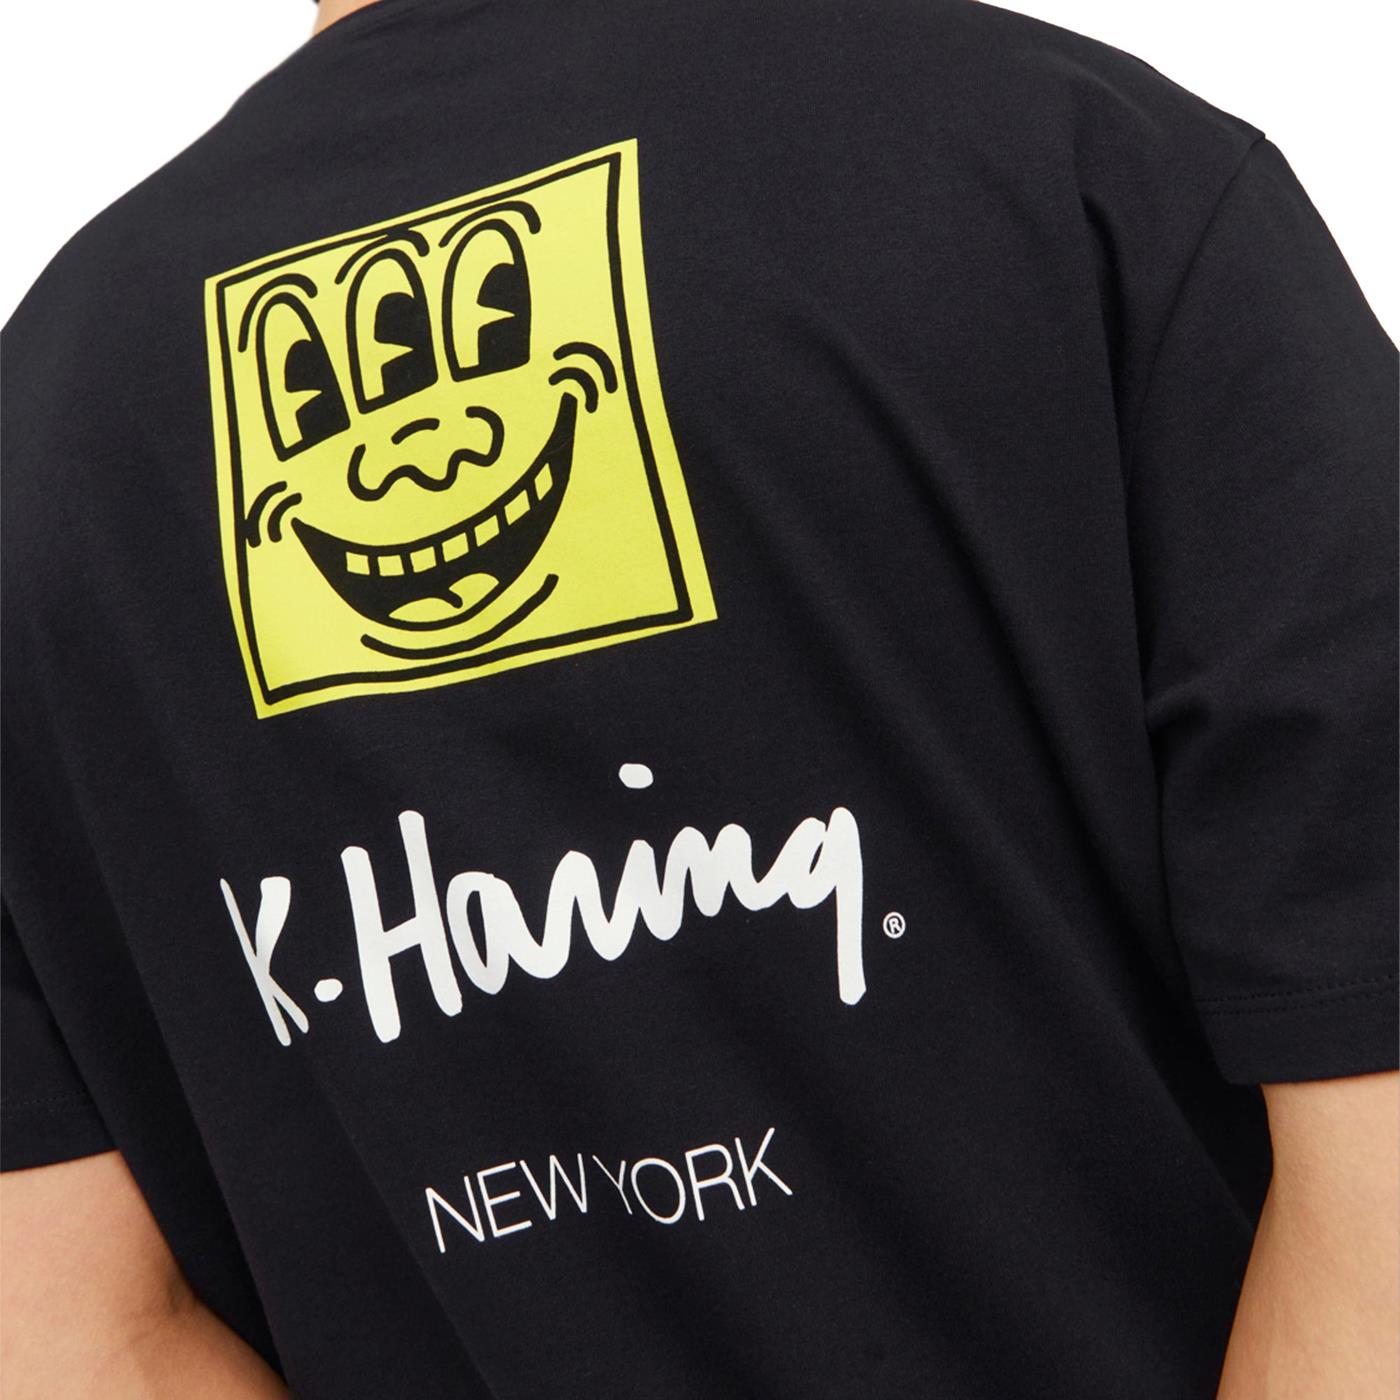 Keith Haring Back Tee SS Crew Neck